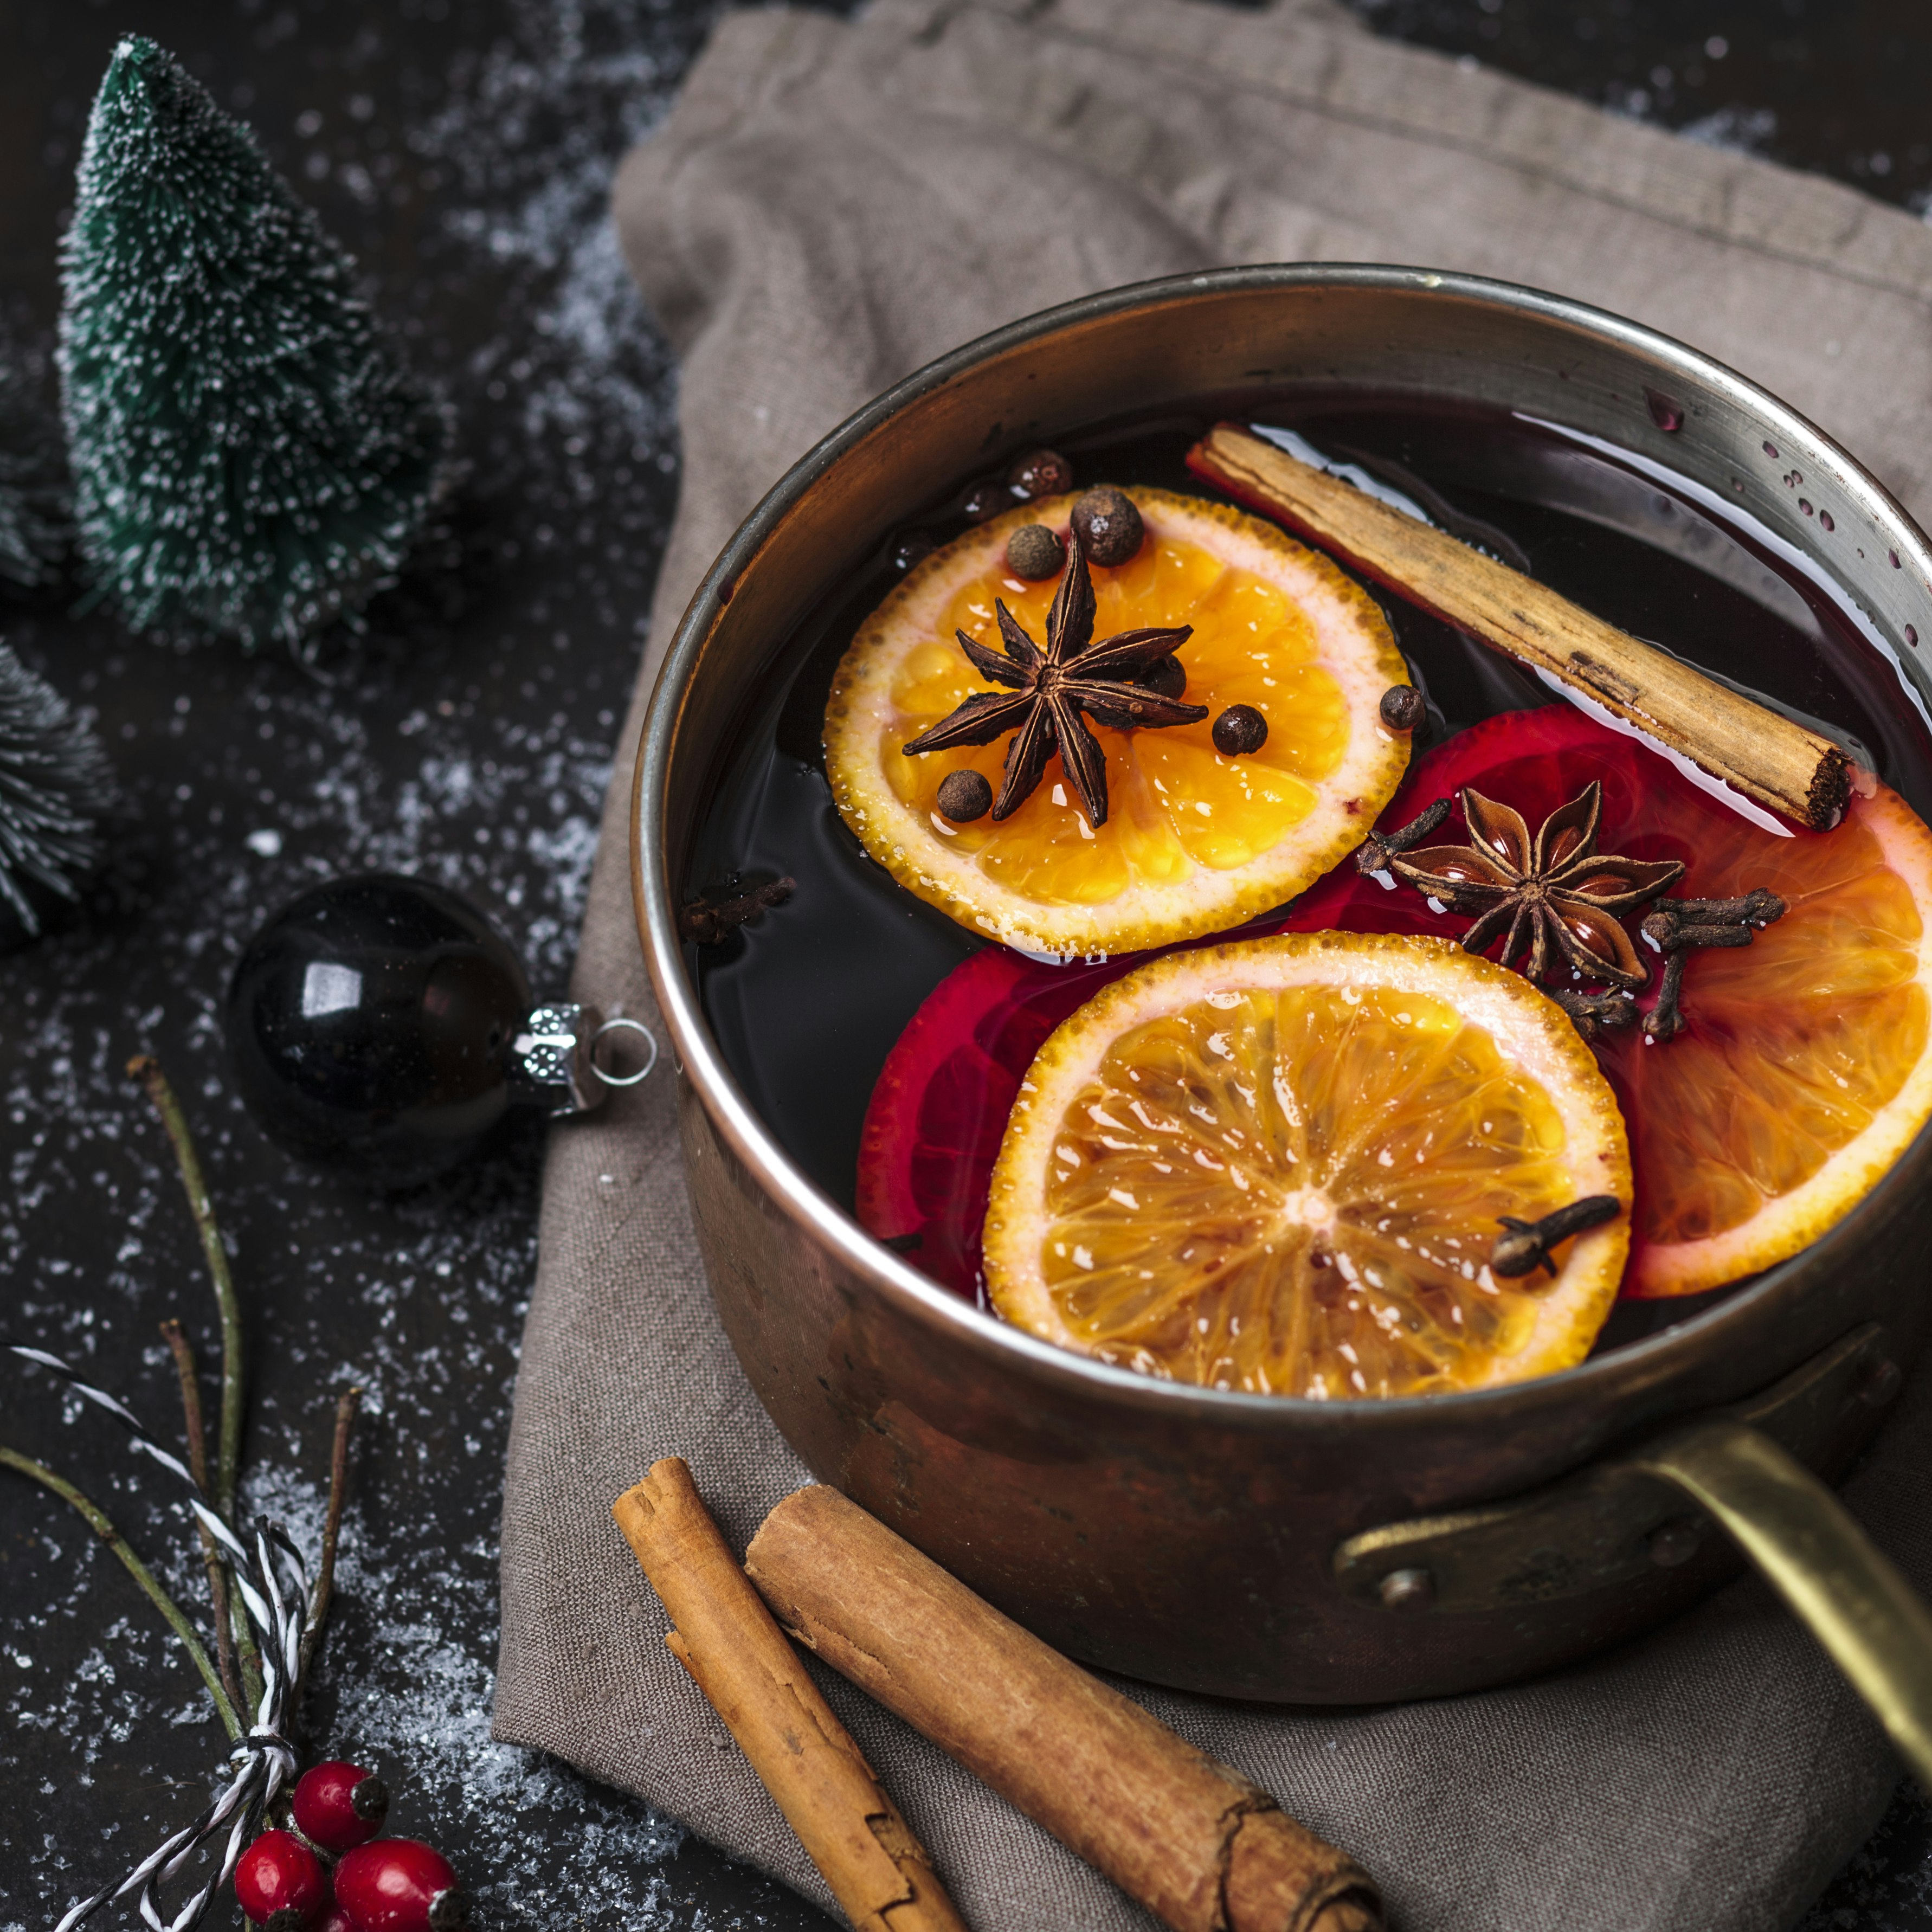 A silver pan filled with mulled wine, cinnamon sticks, orange slices and star anise is surrounded by miniature frosted Christmas trees, cranberries and an ornament